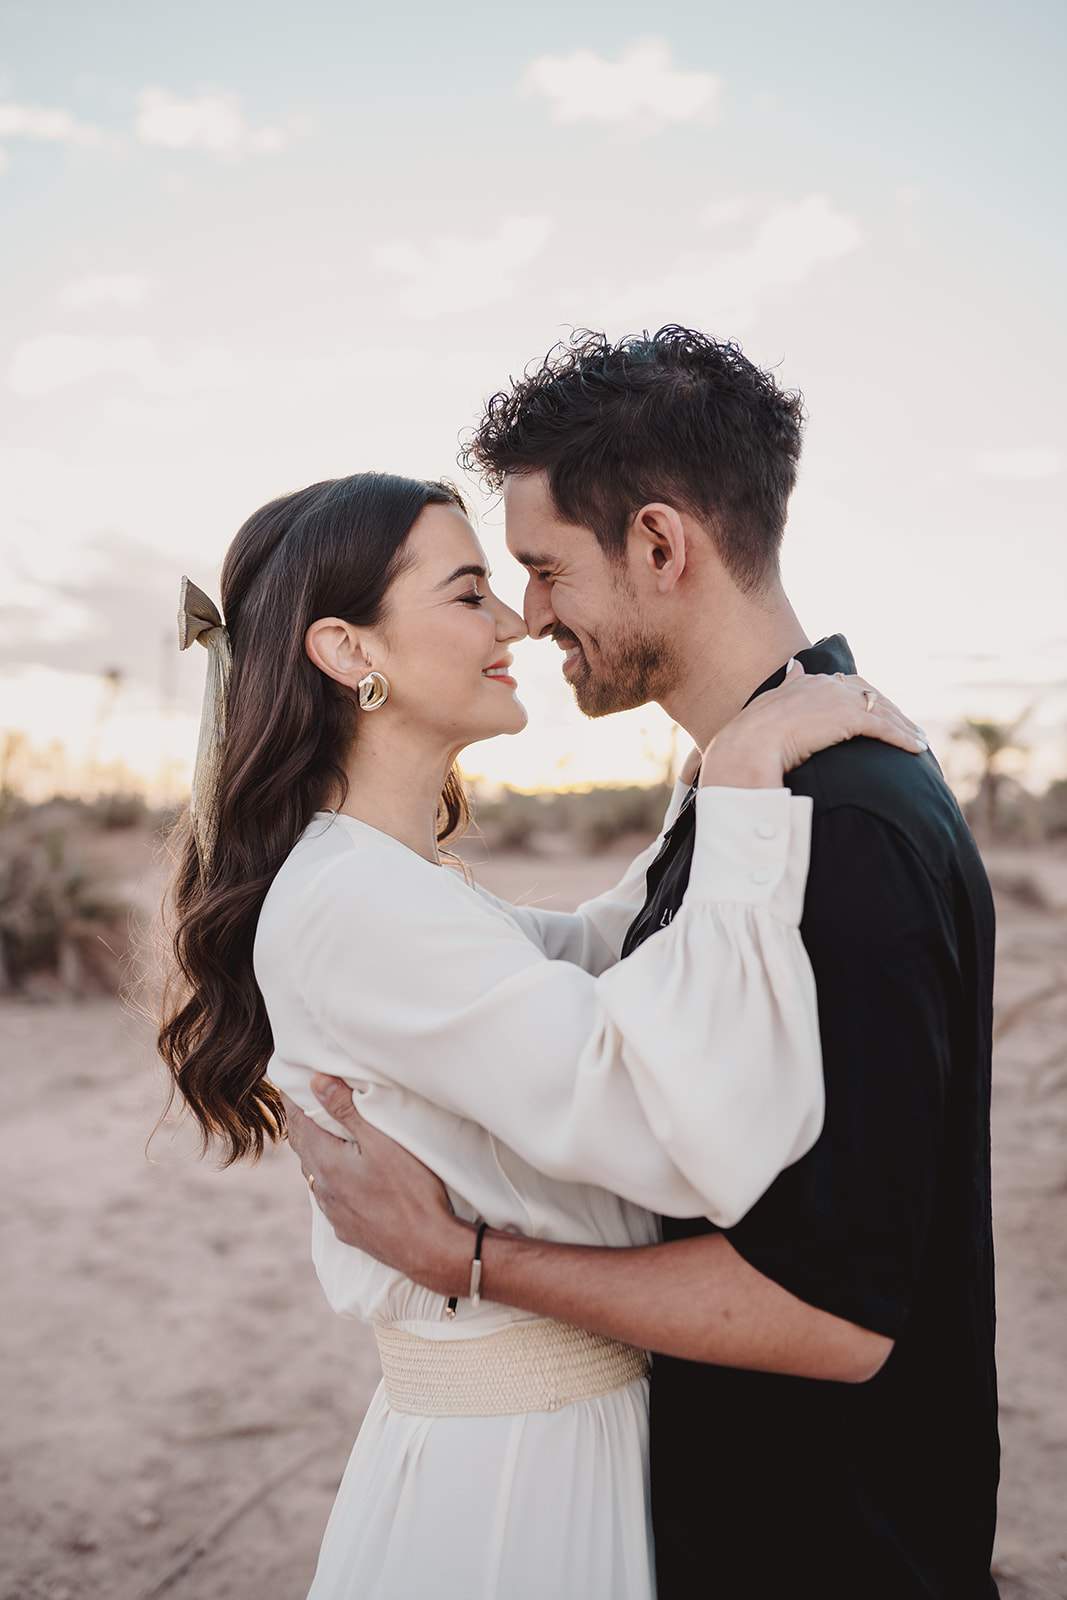 A couple who eloped in Marrakech stand in the Moroccan dessert at sunrise